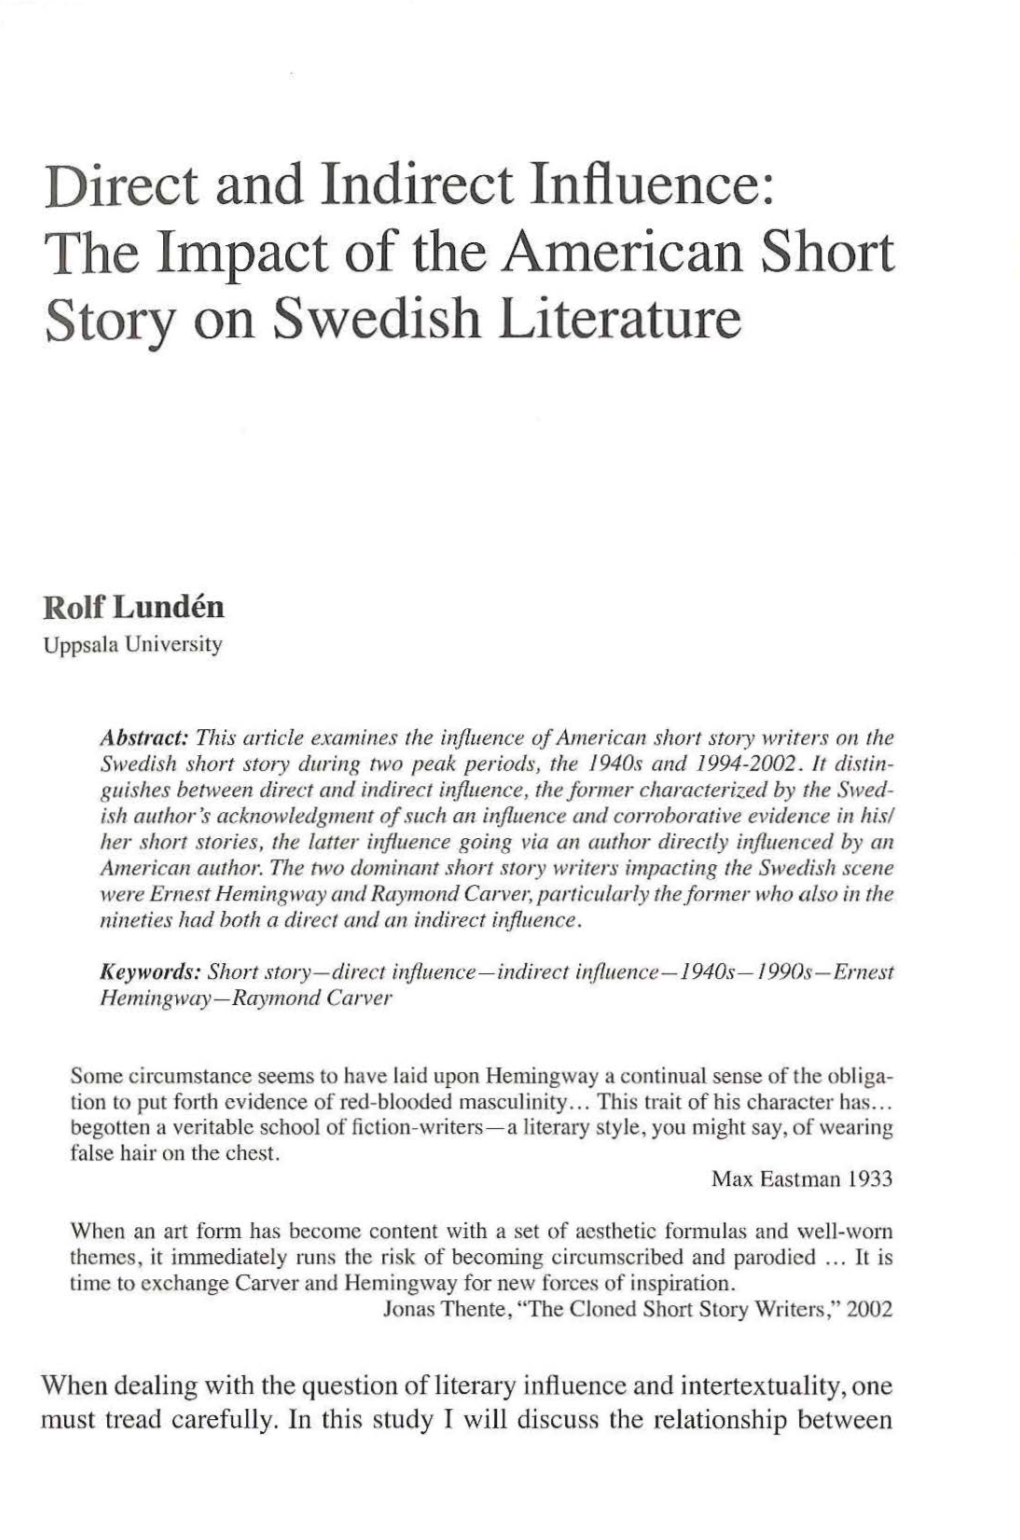 Direct and Indirect Influence: the Impact of the American Short Story on Swedish Literature